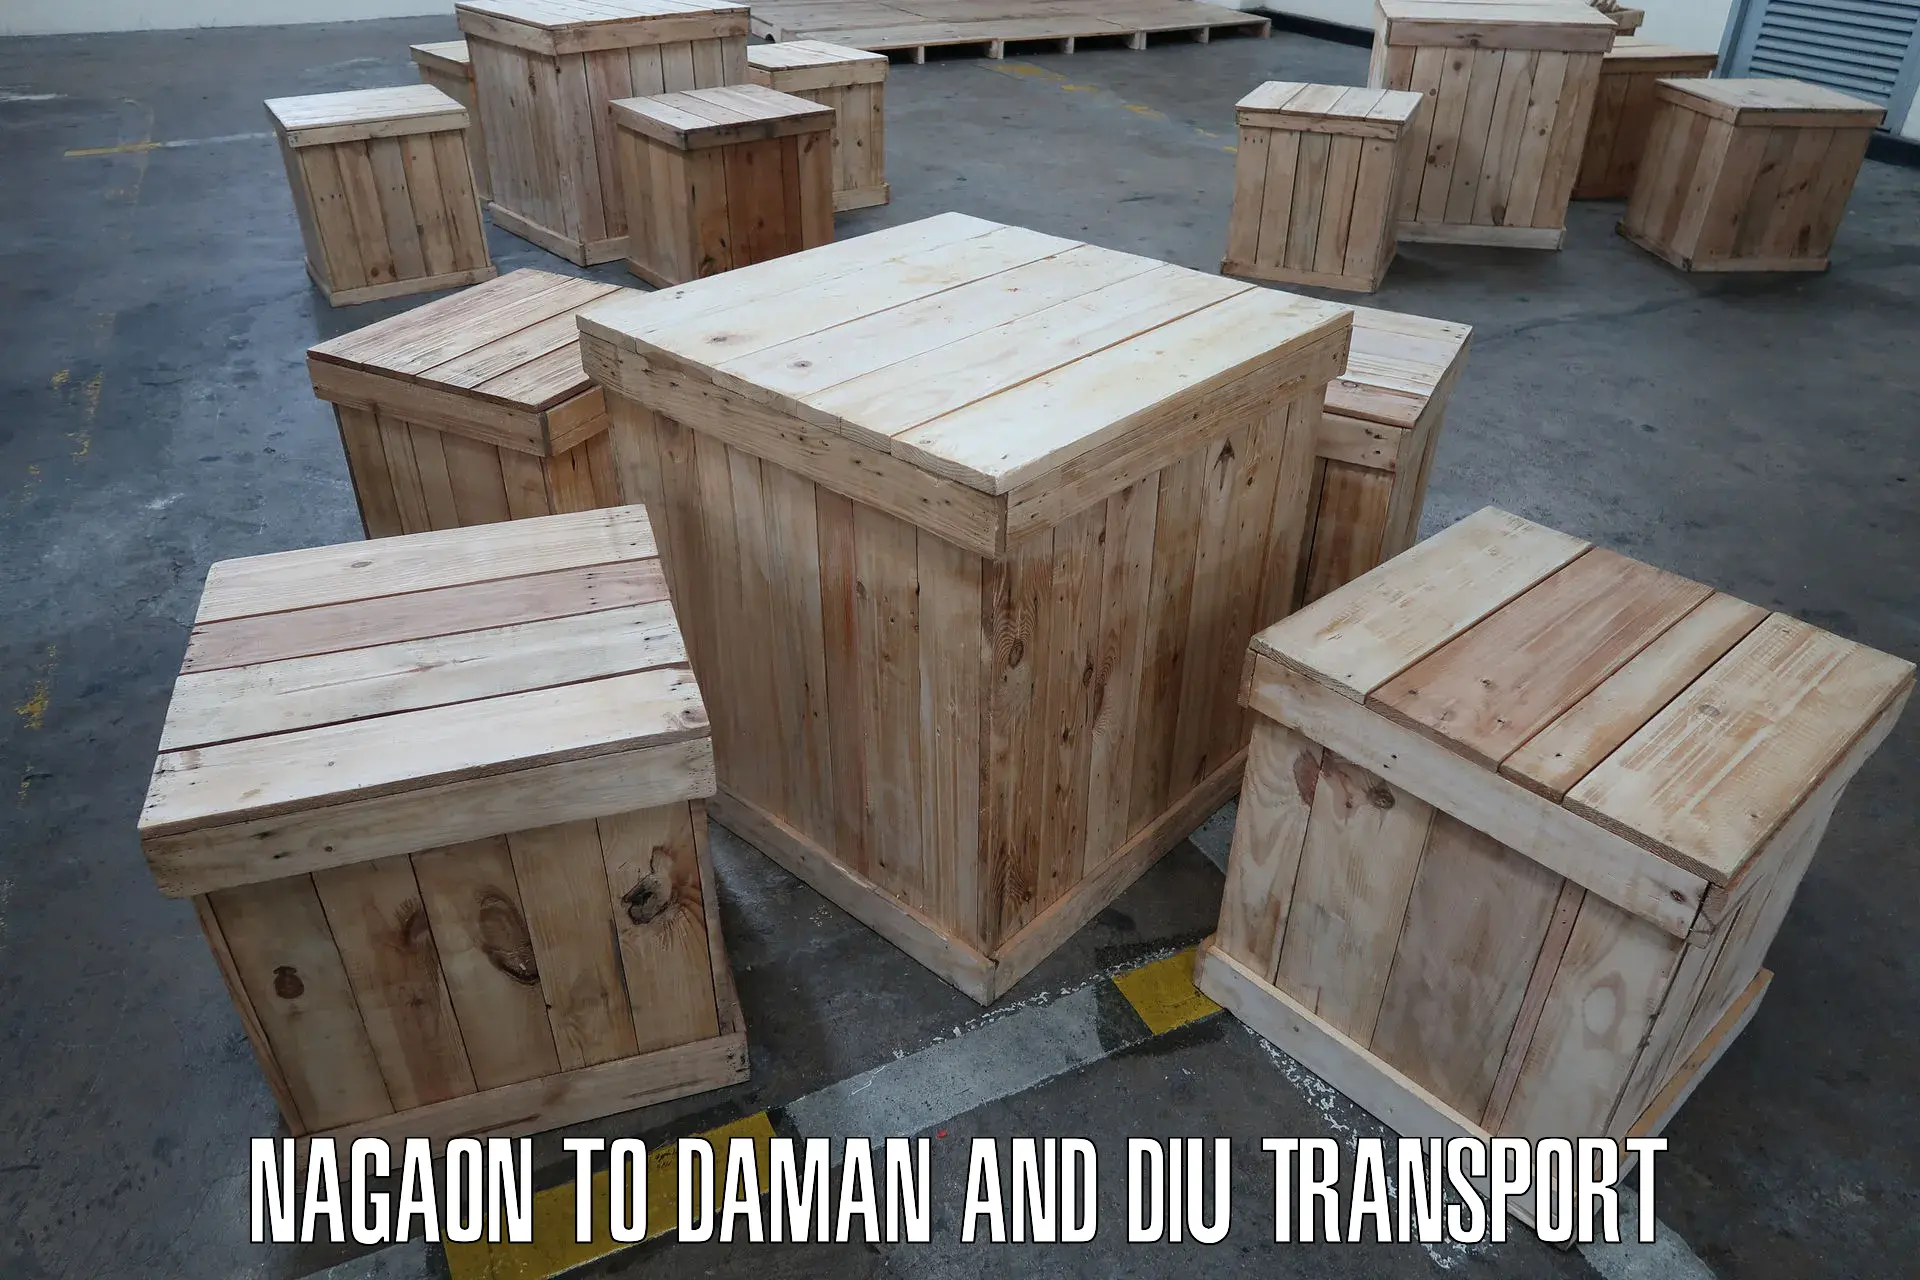 Container transport service Nagaon to Daman